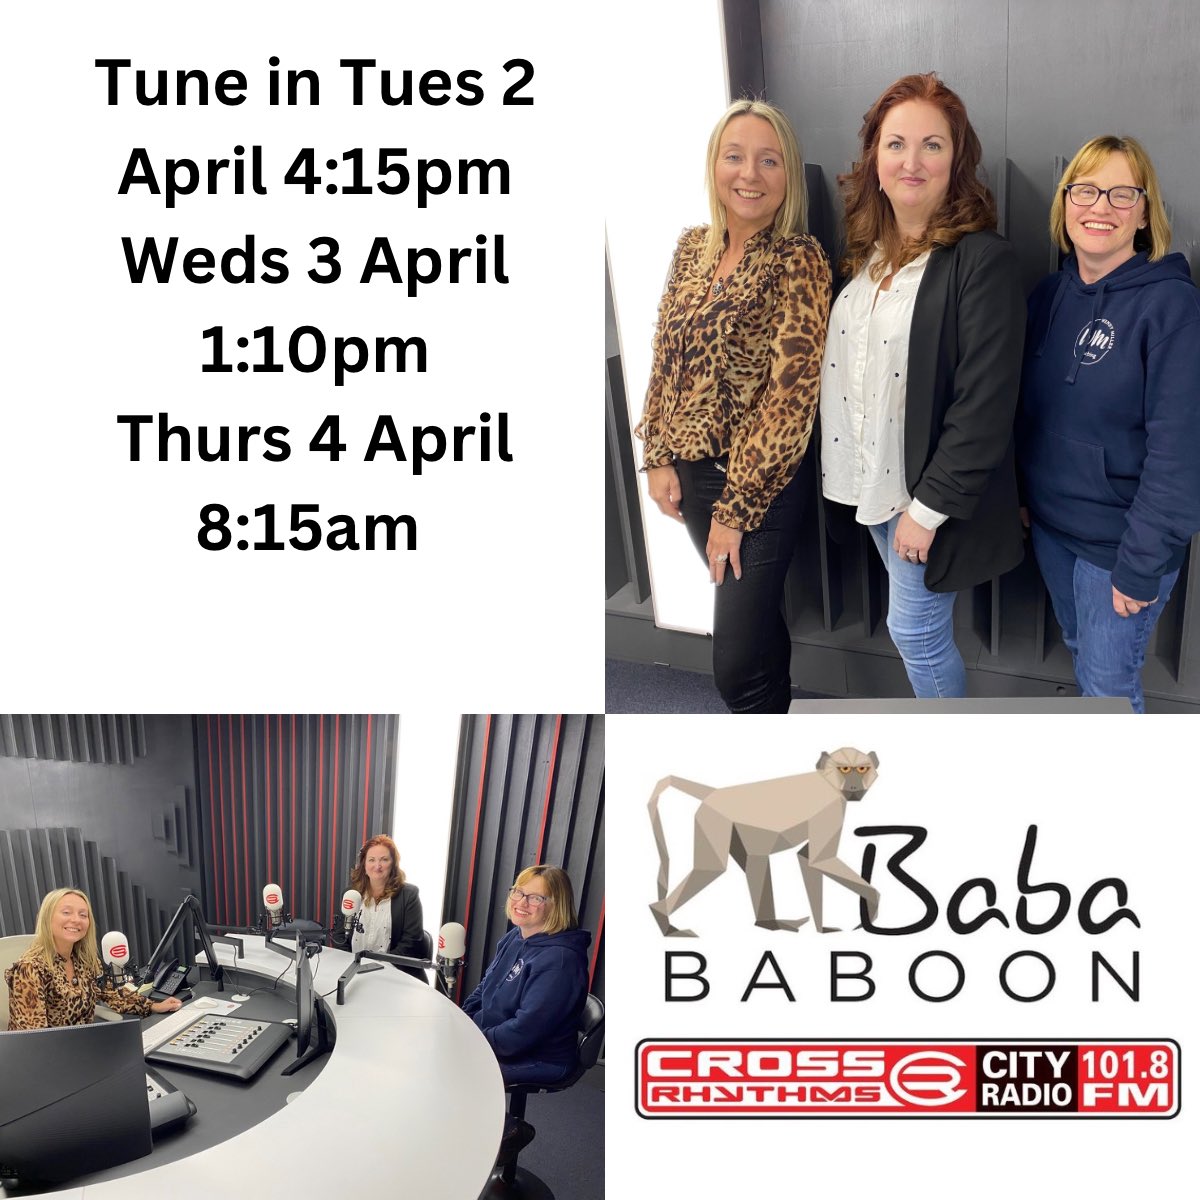 #BusinessSpotlight @SonyaWakefield chats to Leanne Stanley of Maze Counselling & Wendy Miller of Wendy Miller Coaching 📻 Tune in from today - Tues 2 April ⭐️ #radio #businessshow #babatastic